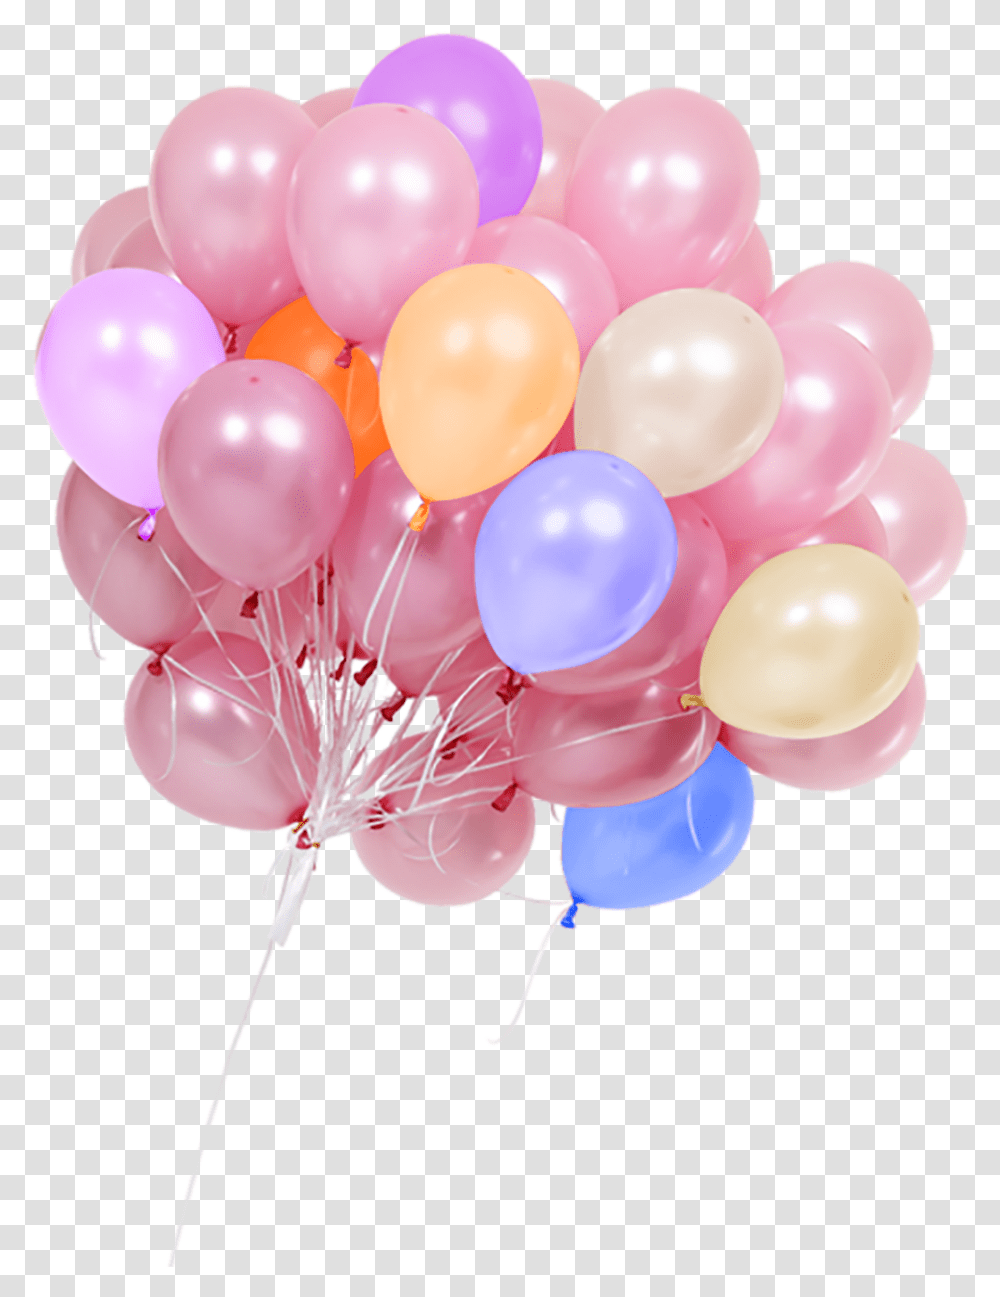 Balloon Images And Clipart With Alfa Background Real Balloons Background Transparent Png